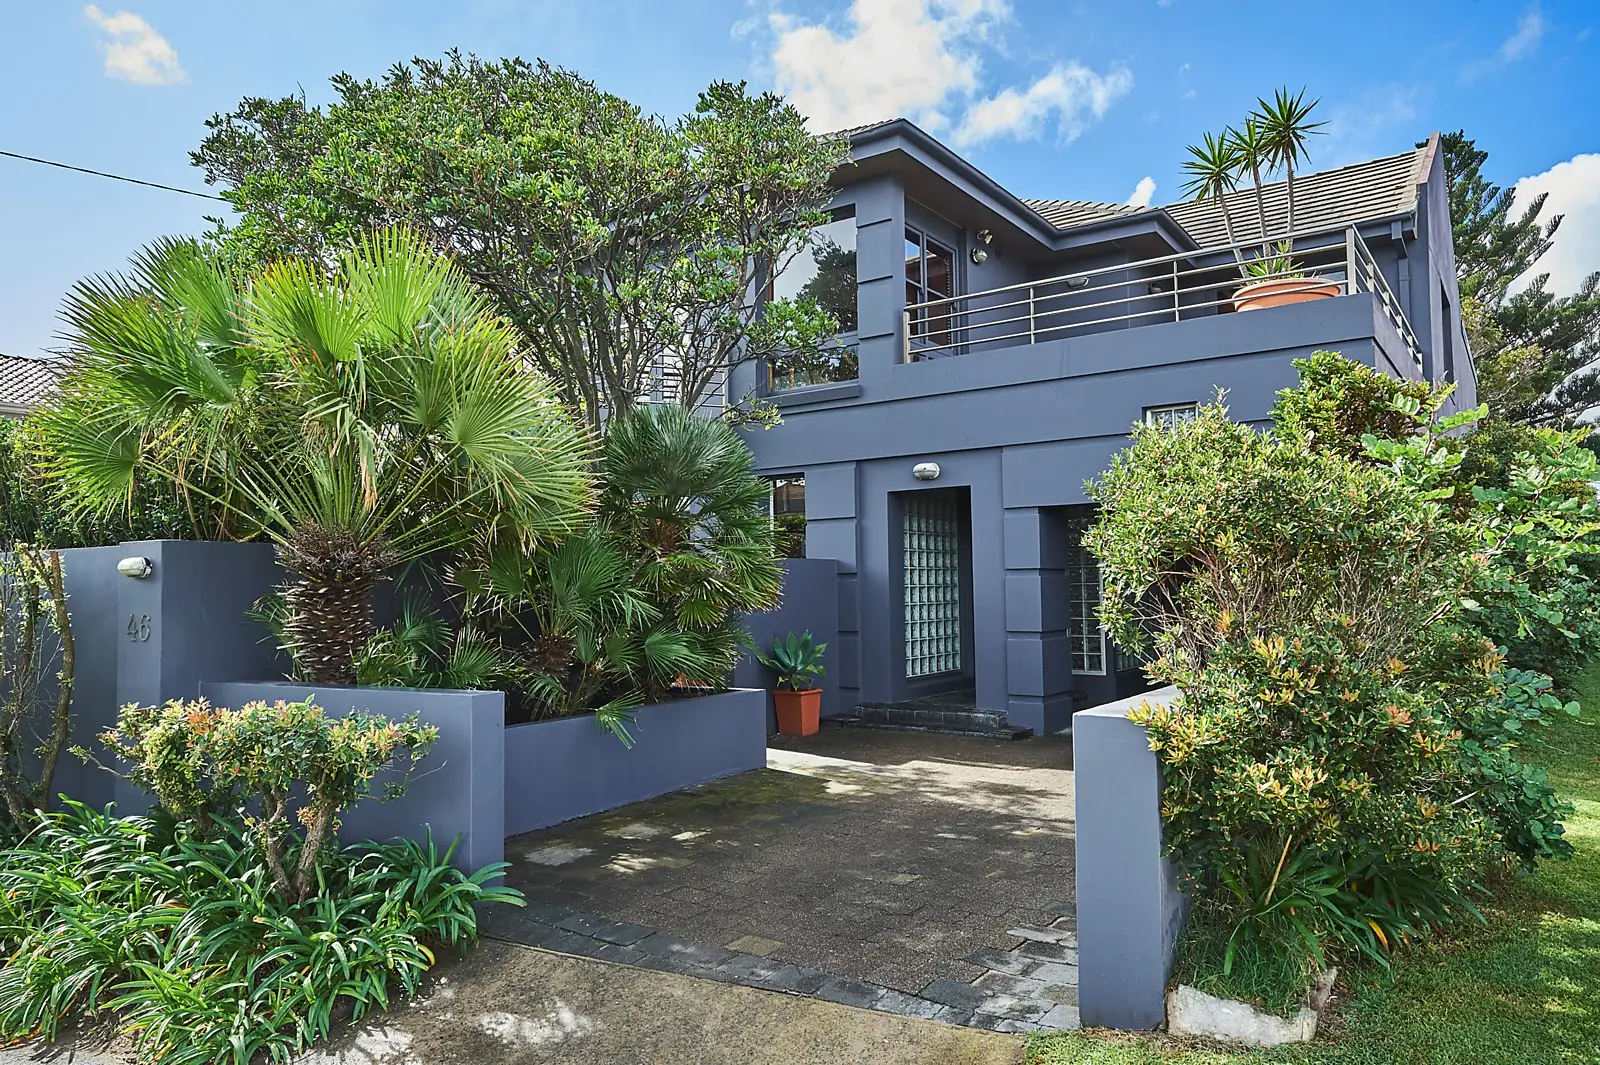 Photo #2: 46 Wentworth Street, Dover Heights - Sold by Sydney Sotheby's International Realty